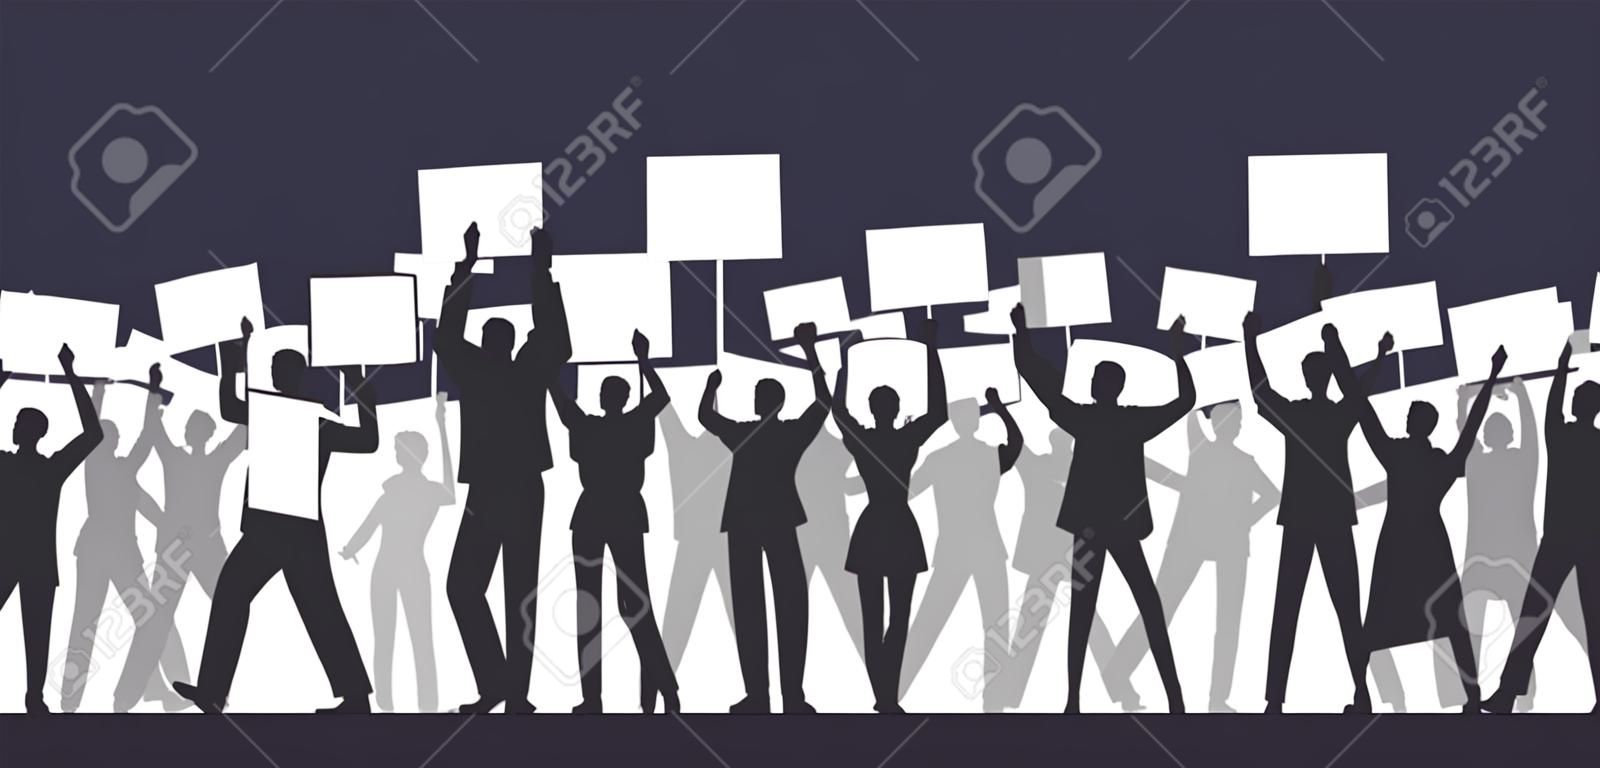 Protest. People holding placards. Persons standing together with blank banners. Group of men and women with banners taking part in parade, picket, protests. Social activism. Vector illustration.